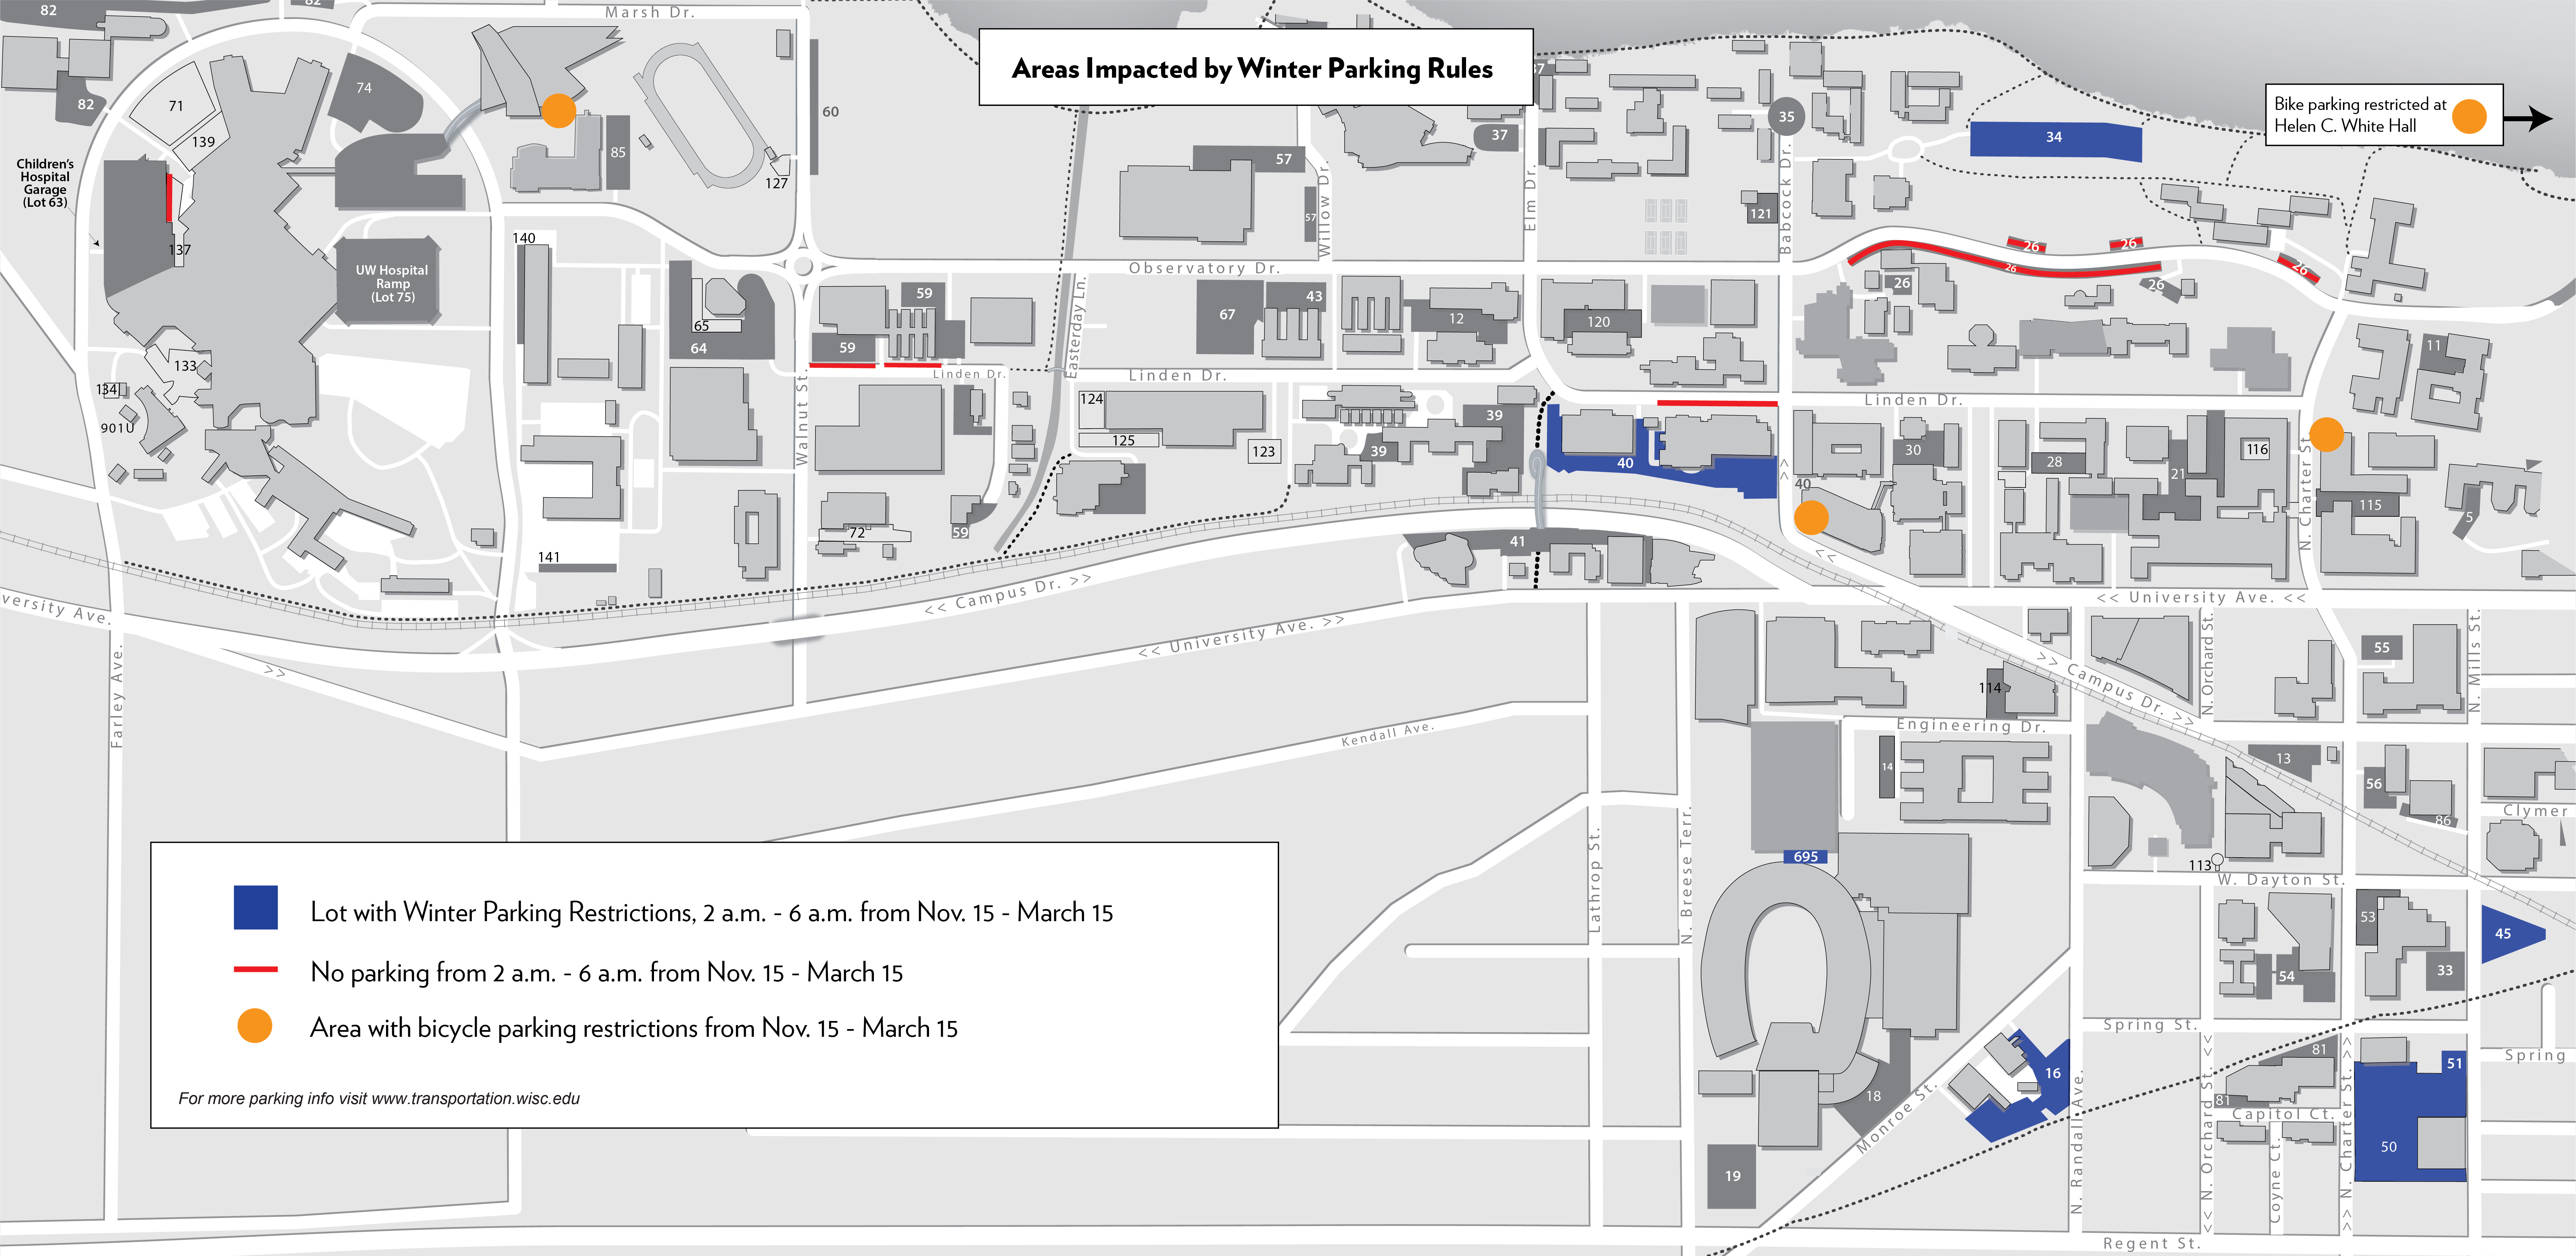 Map of areas with parking restrictions from Nov. 15 - March 15, 2 a.m. - 6 a.m.